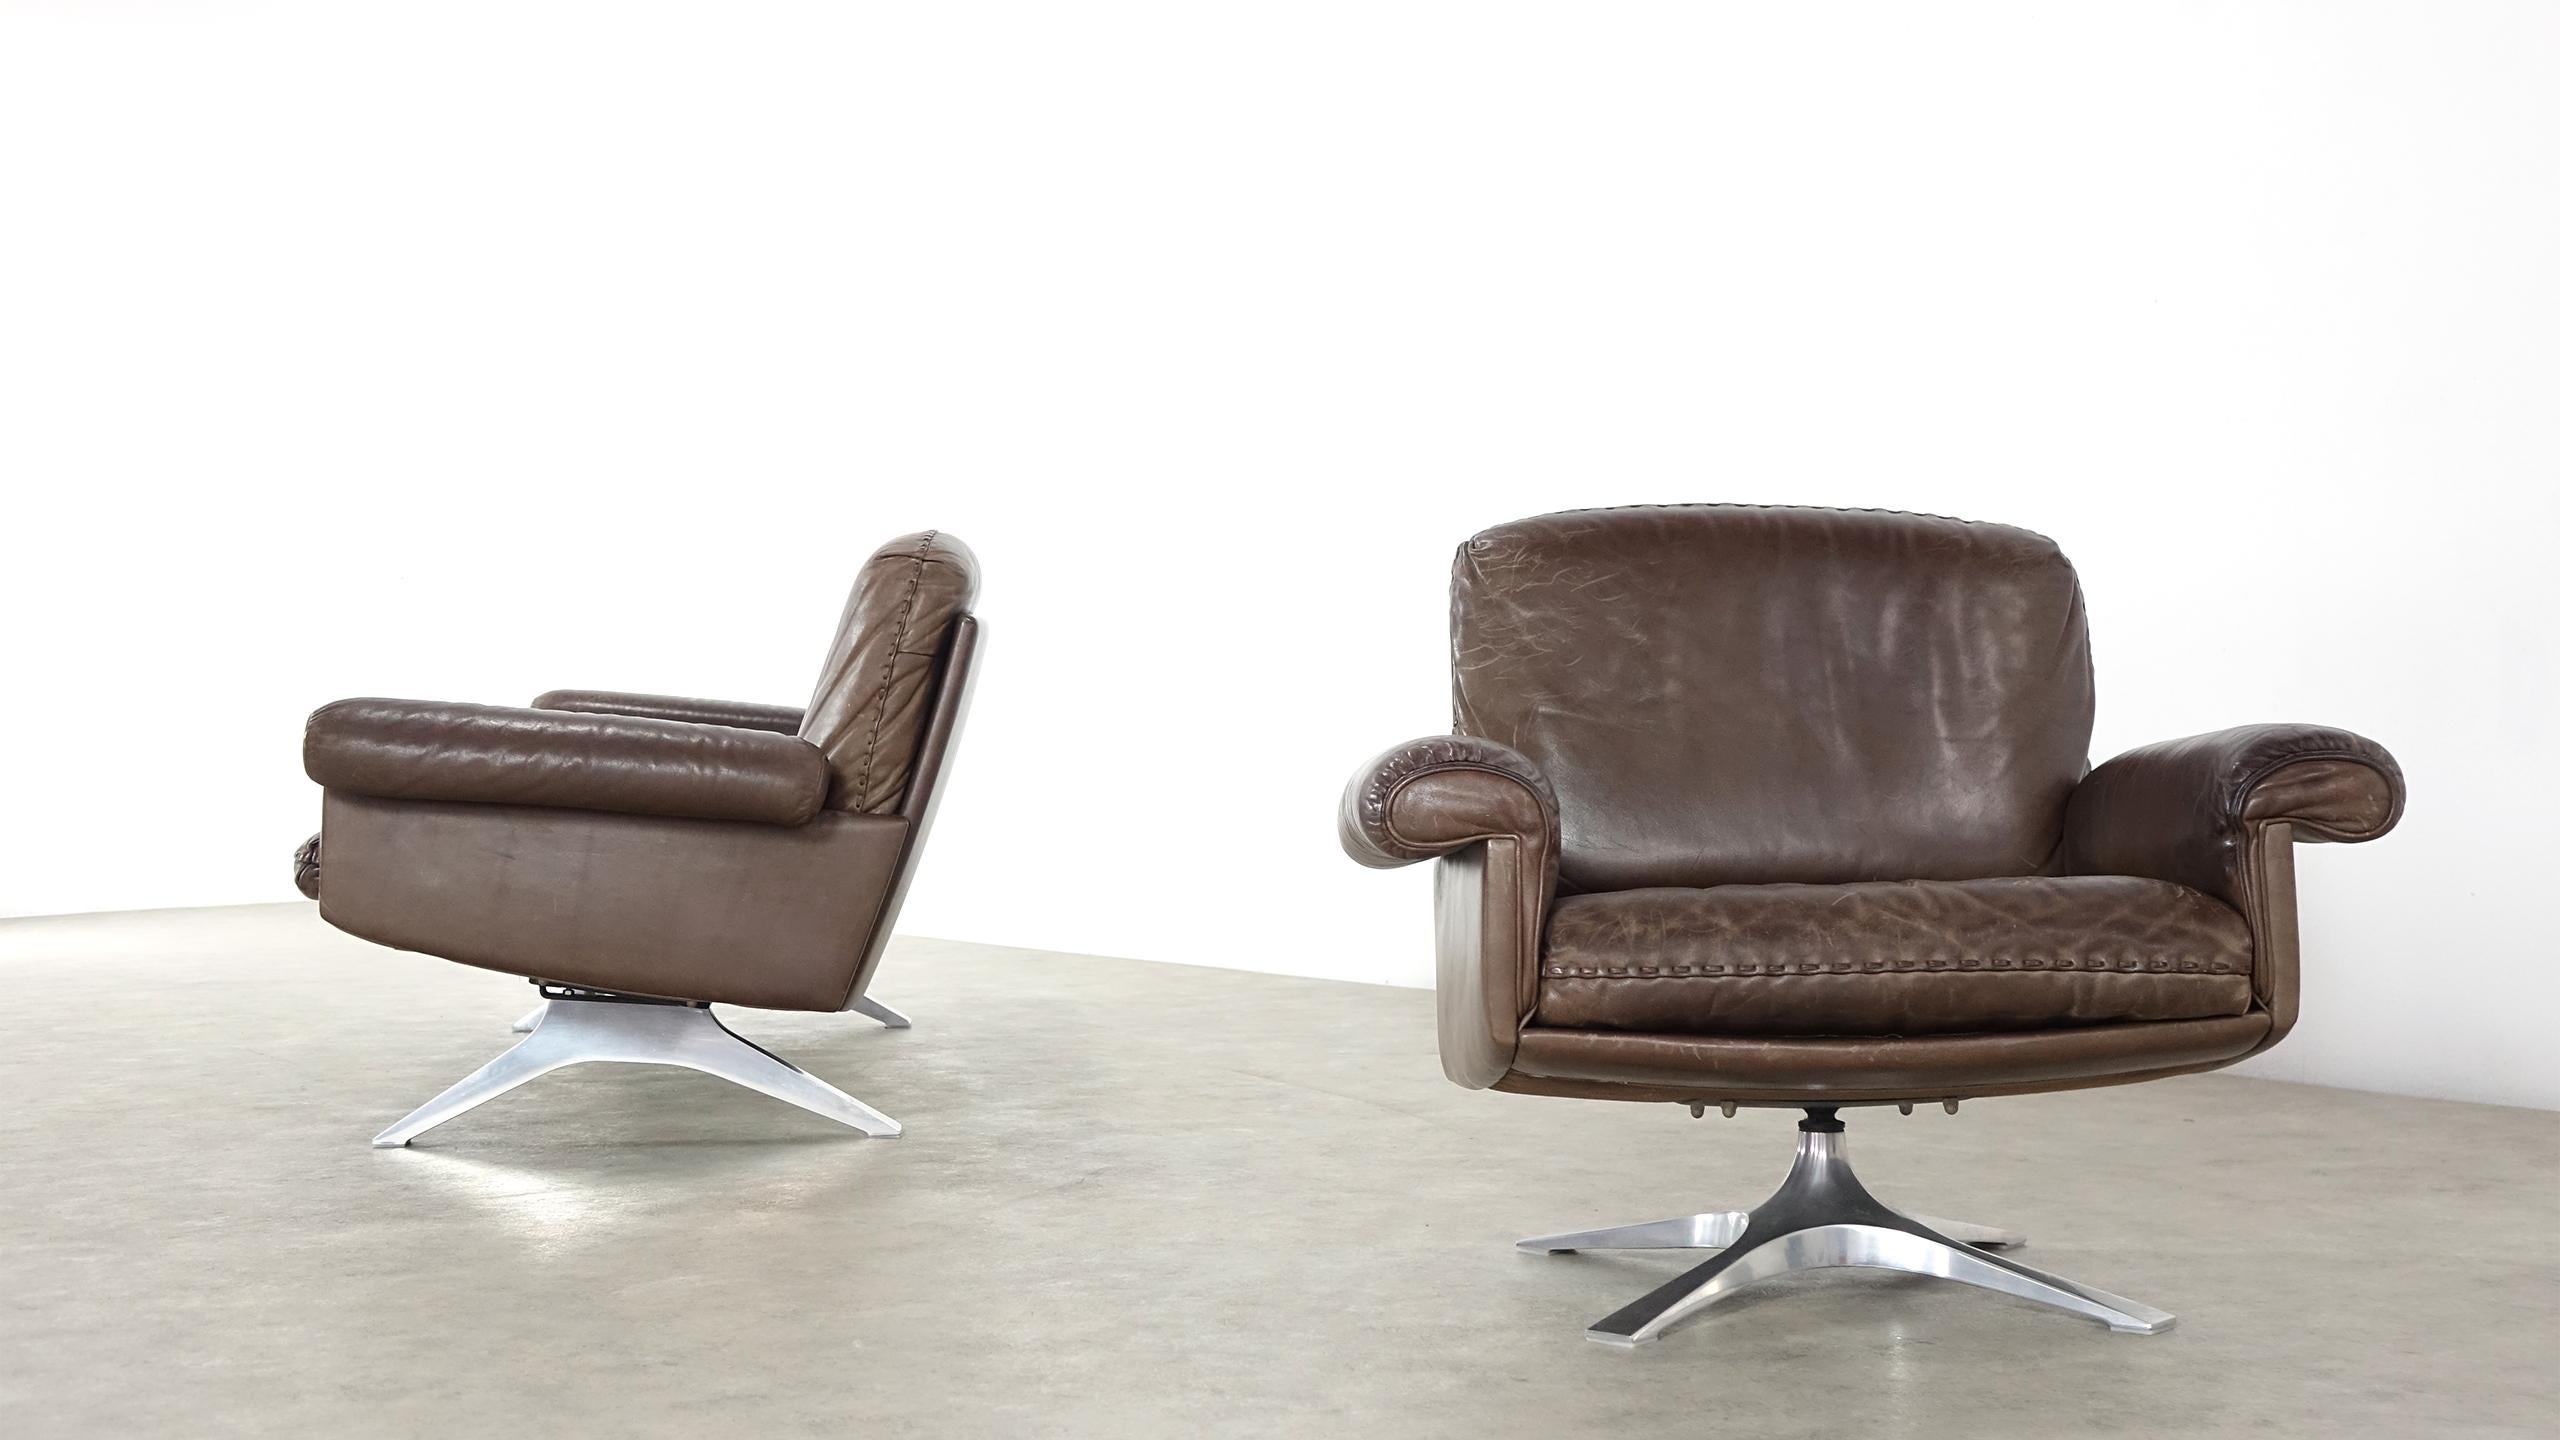 De Sede DS 31 lounge sofa and swivel armchair were built in the 1970s by De Sede of Switzerland. They are upholstered in brown leather with whipstitch edge detail. Both pieces are very comfortable and Stand on aluminium bases. De Sede is known by